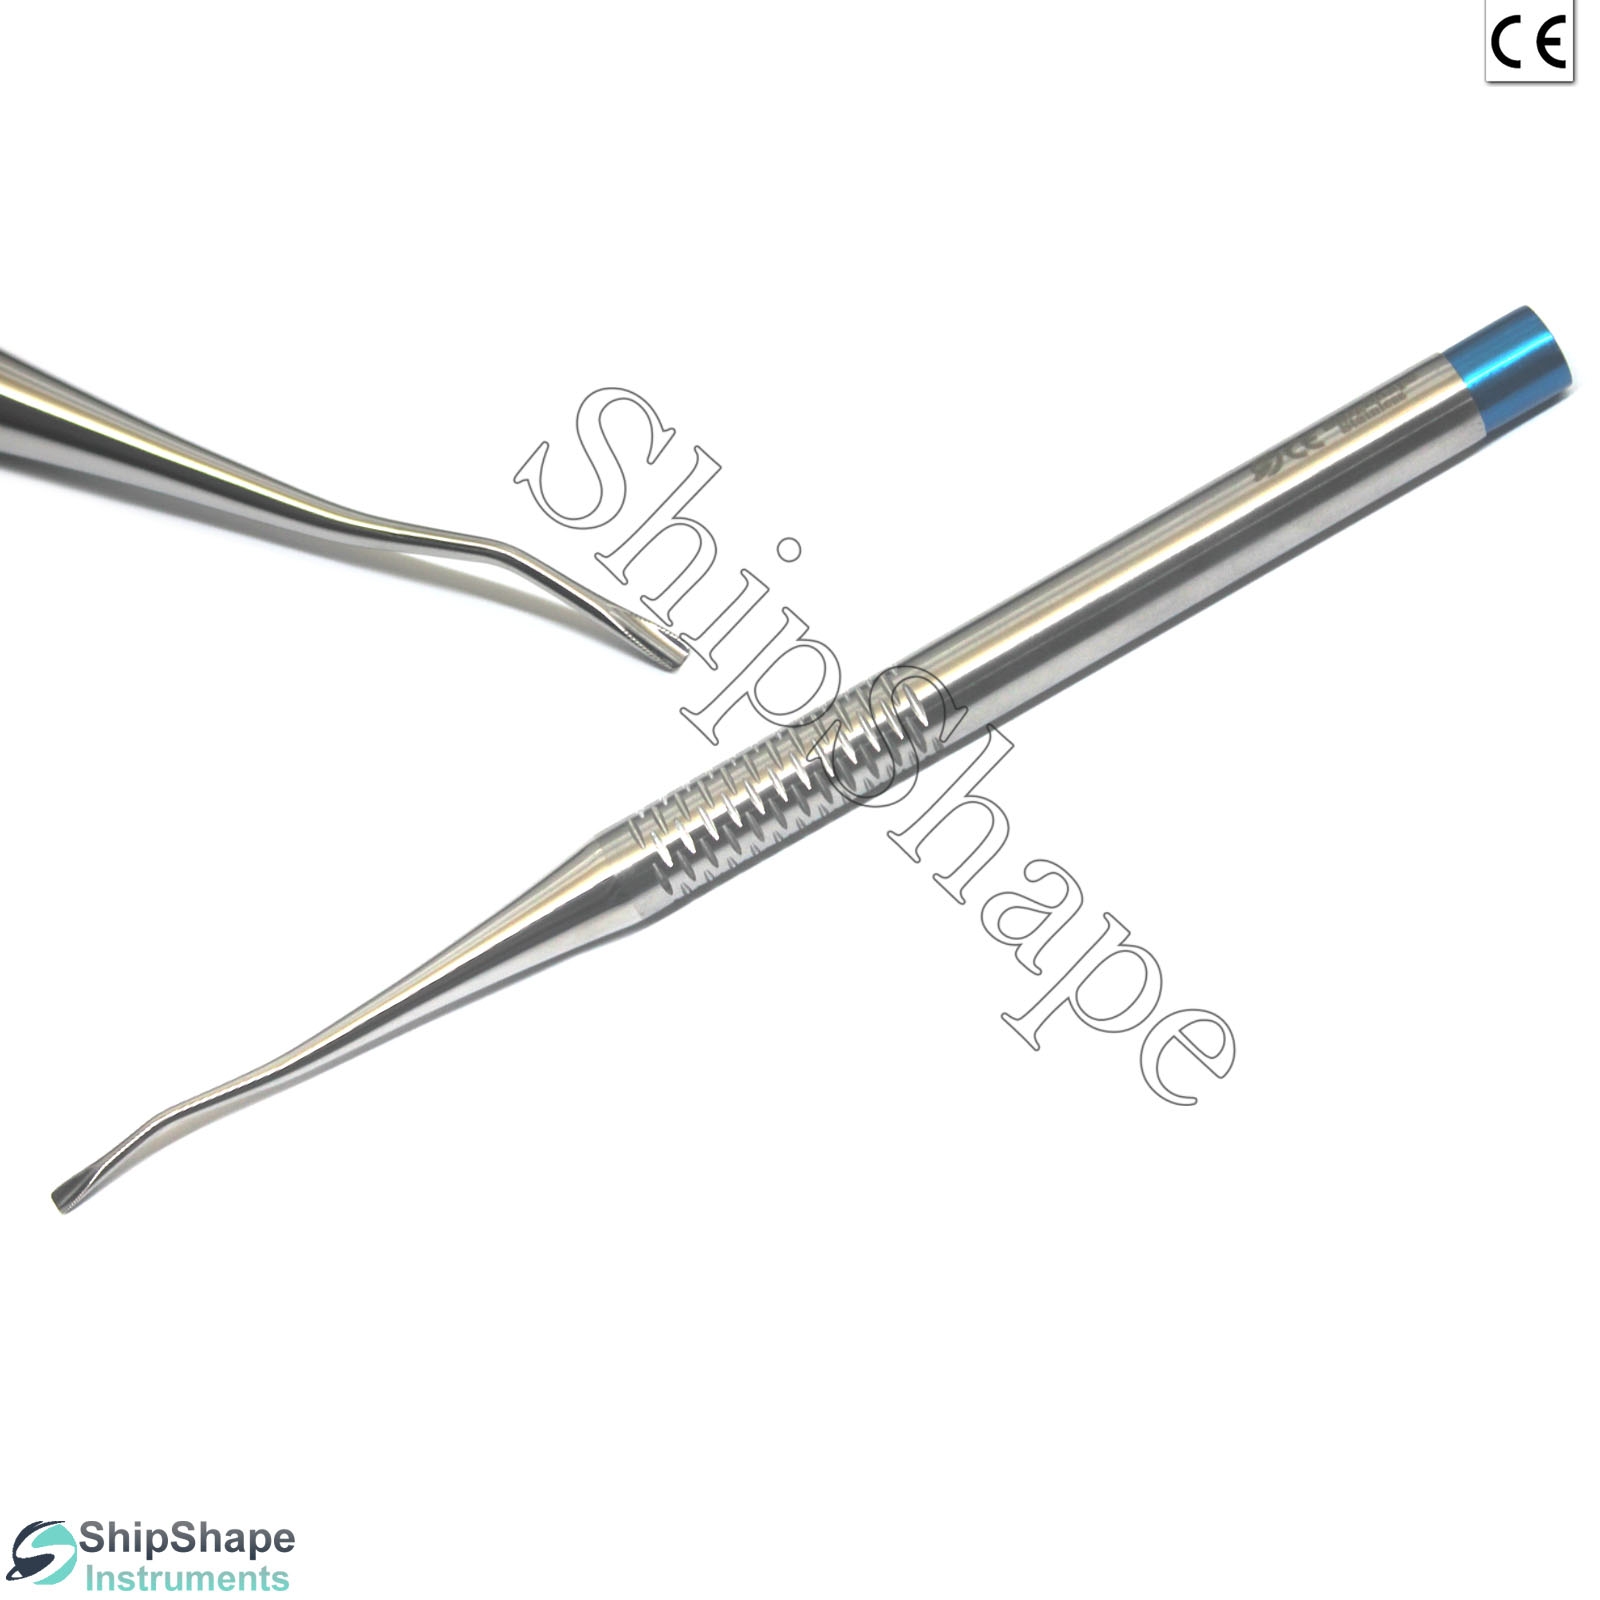 PDL Luxating Implant Root Elevators / Proximetters Surgical Precise Dental Instruments-1326